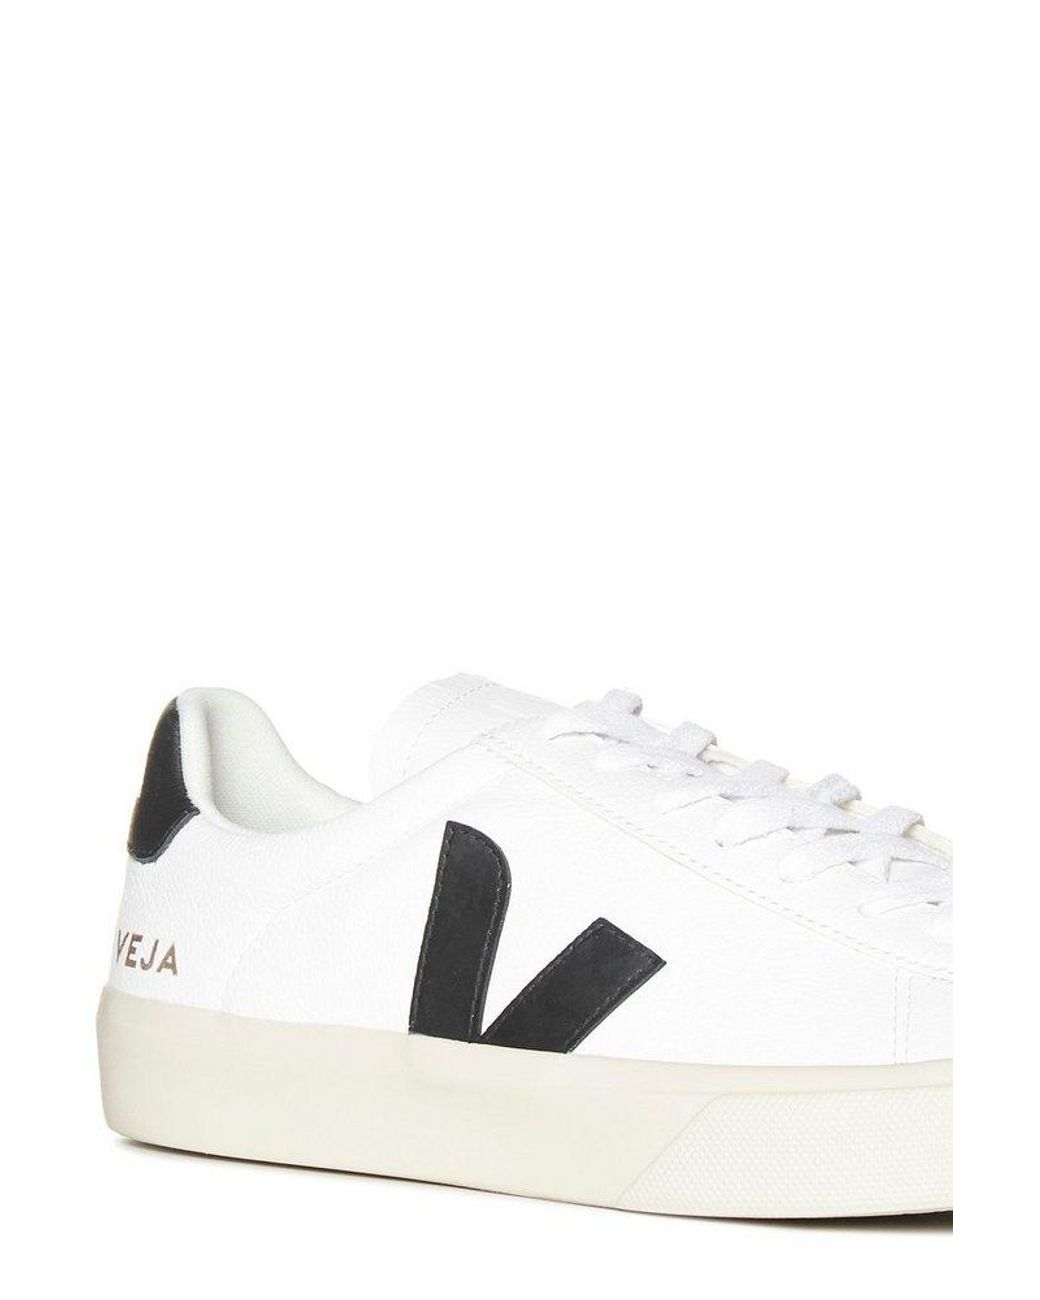 Veja Campo Low-top Sneakers in White | Lyst